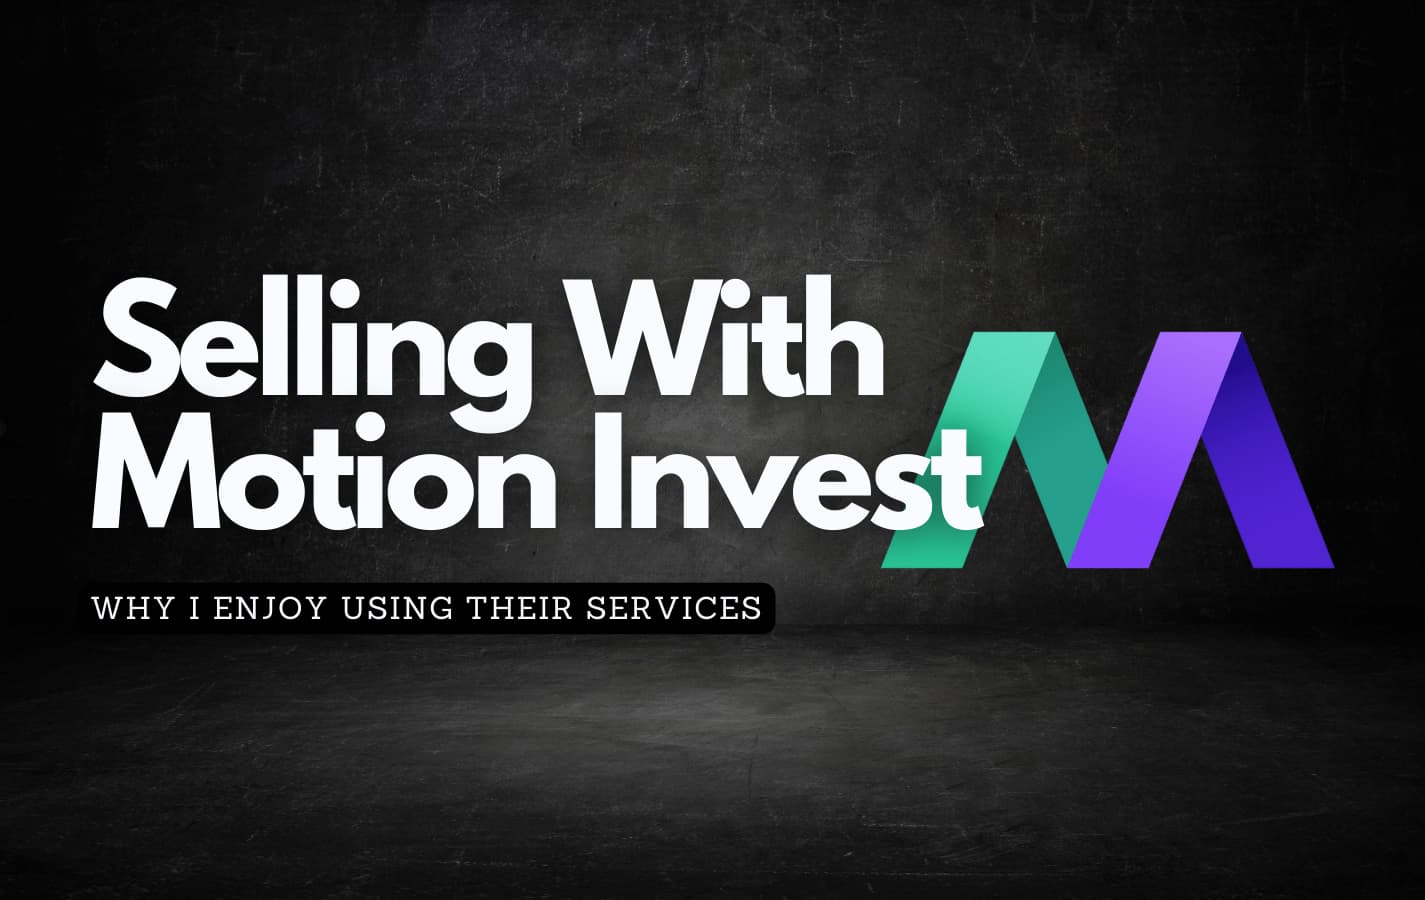 Motion Invest logo against a dark background with the text talking about whether selling on motion invest is worth the time